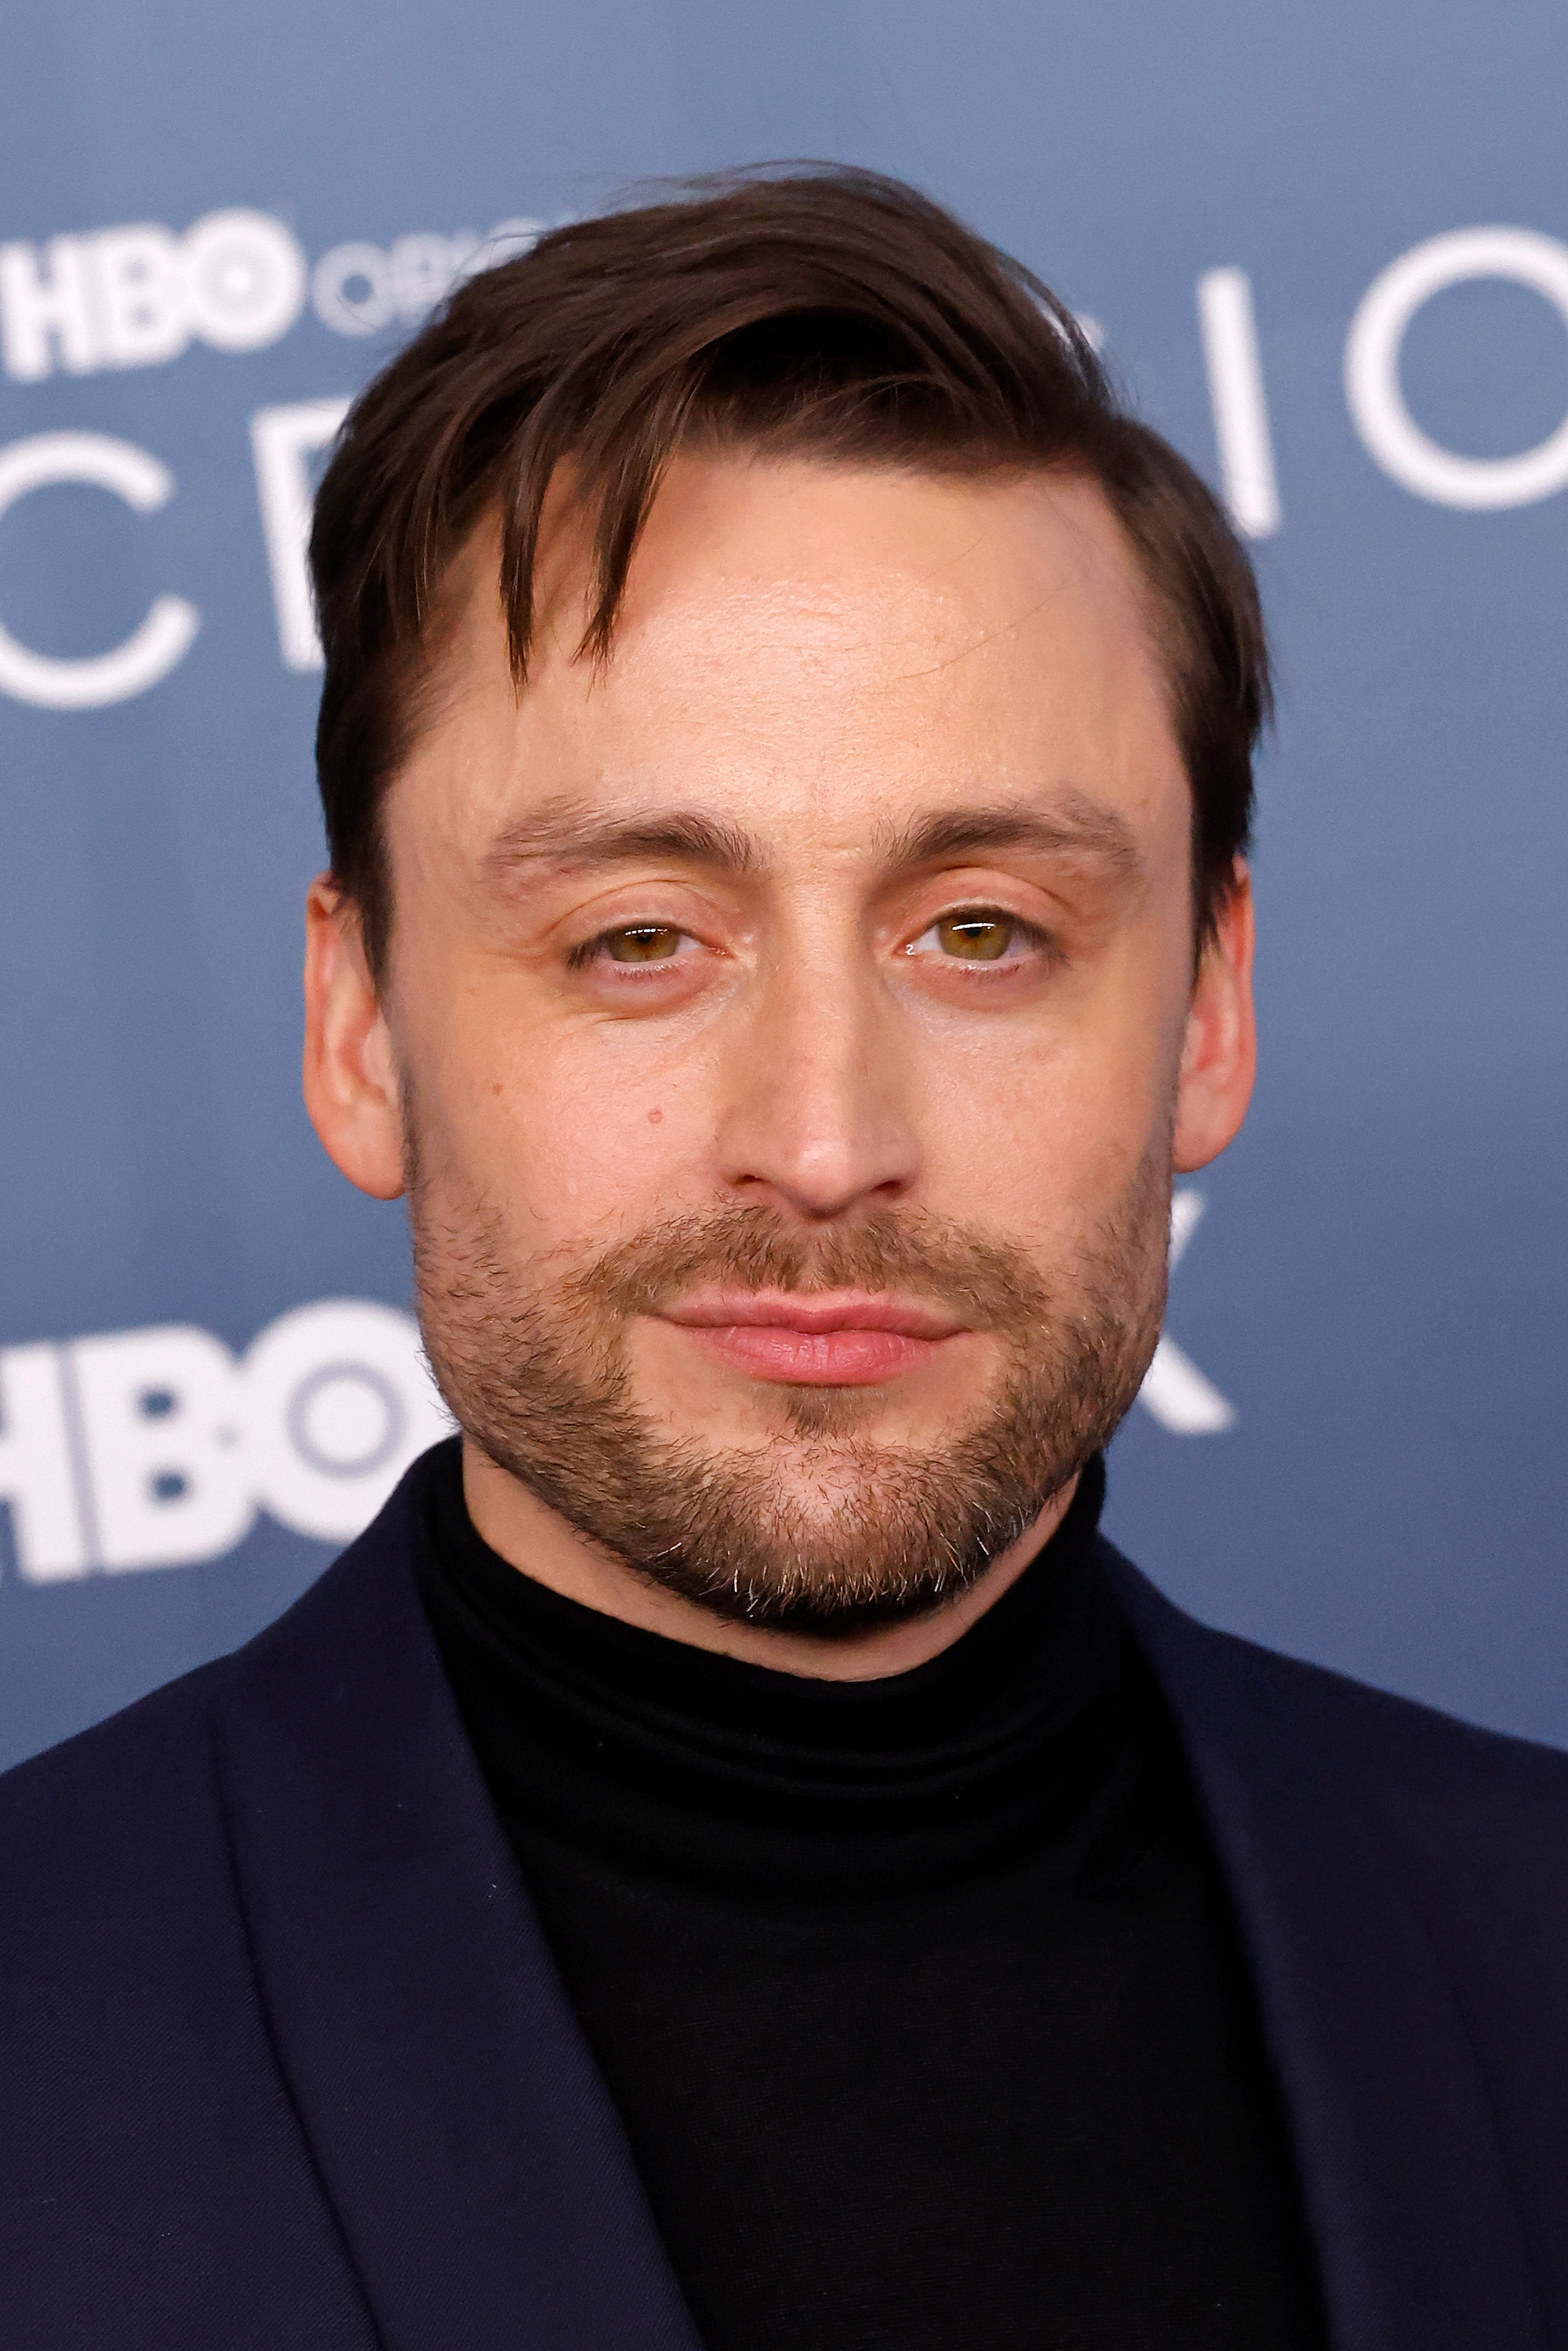 Kieran Culkin attends the Season 4 premiere of "Succession" on March 20, 2023 in New York City | Source: Getty Images